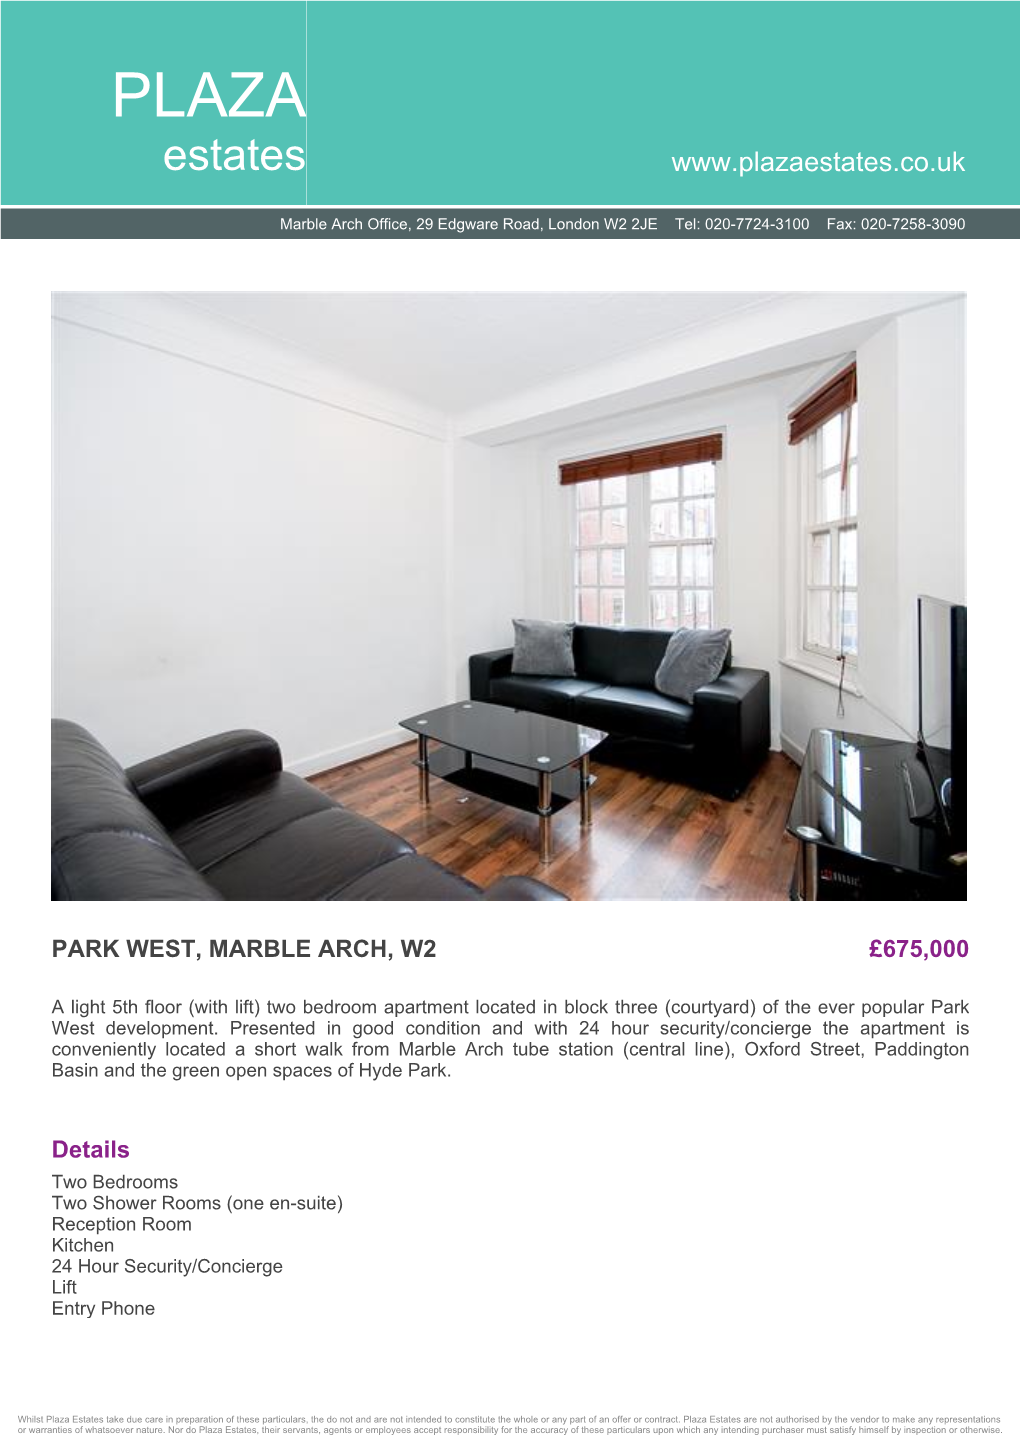 Park West, Marble Arch, W2 £675,000